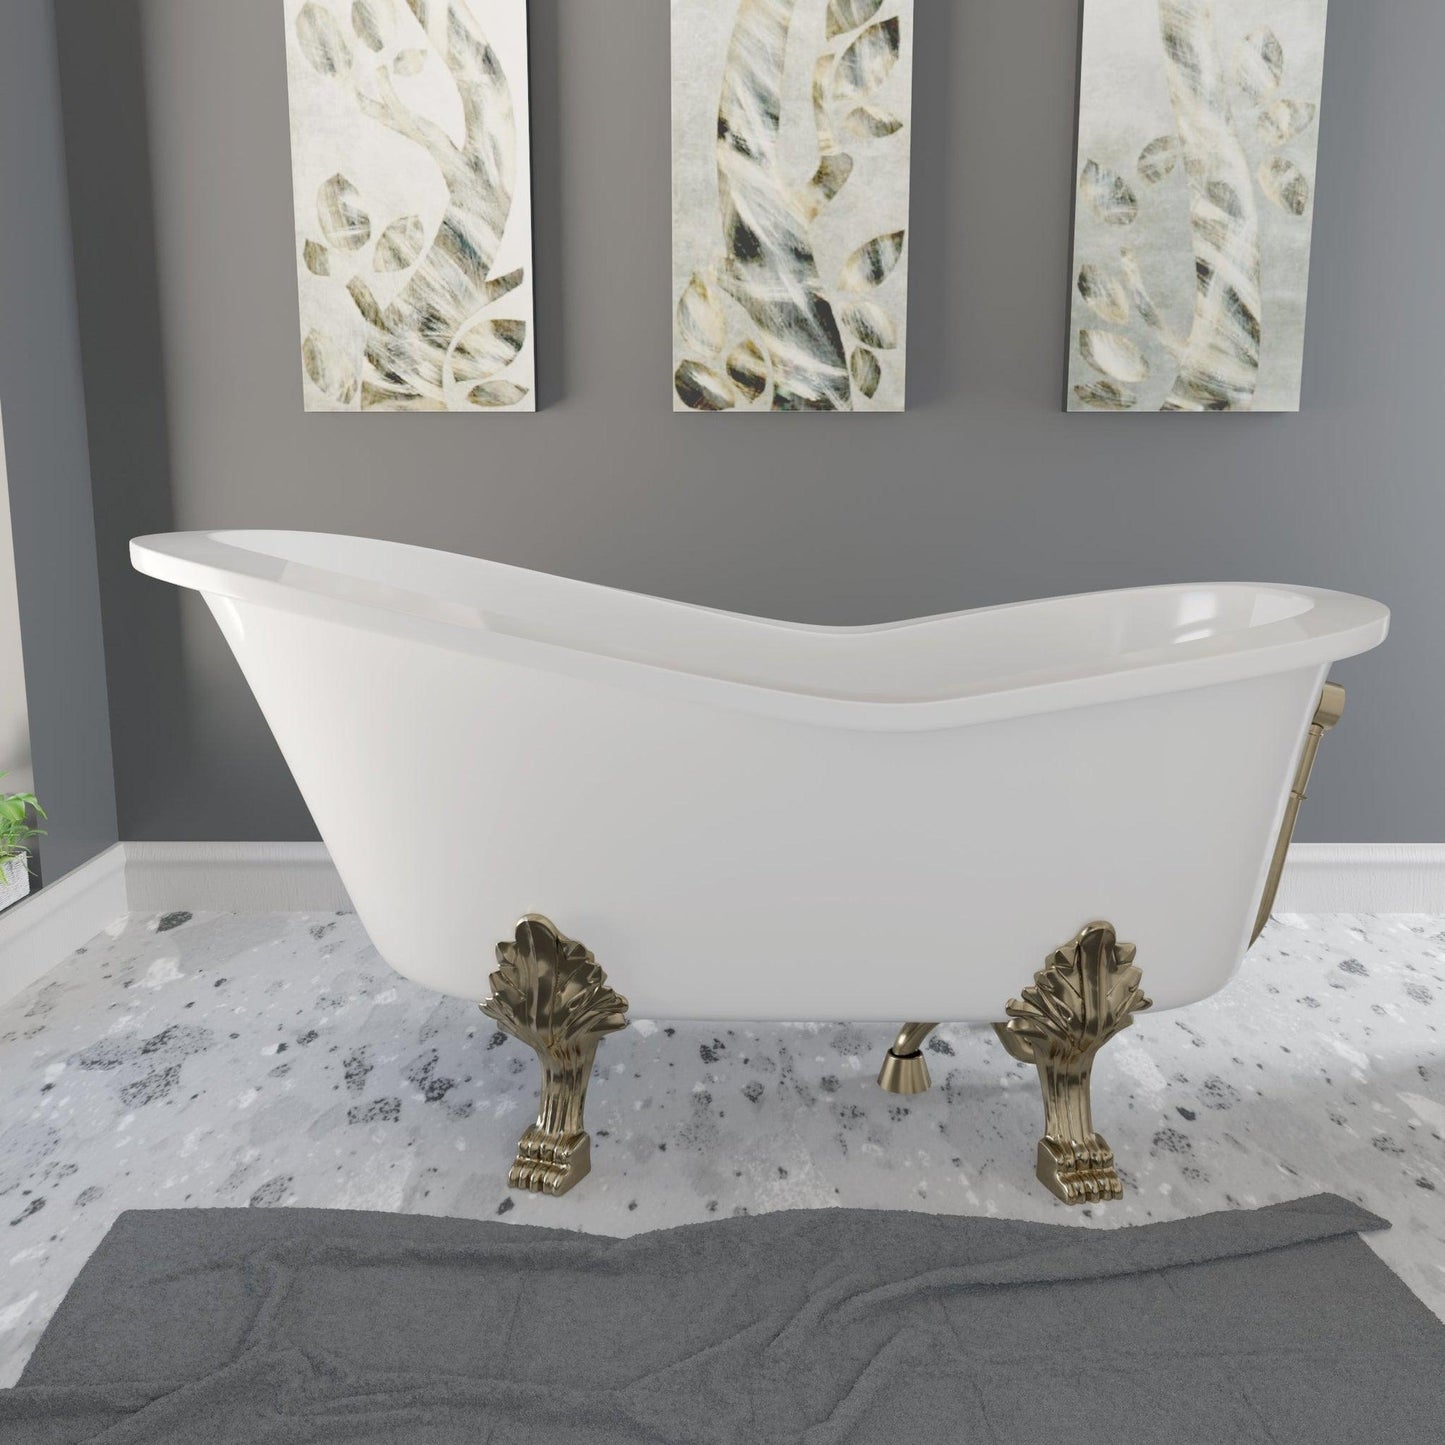 Cambridge Plumbing 62" White Mineral Composite Single Slipper Bathtub With No Deck Holes And Antique Brass Lion Paw Feet